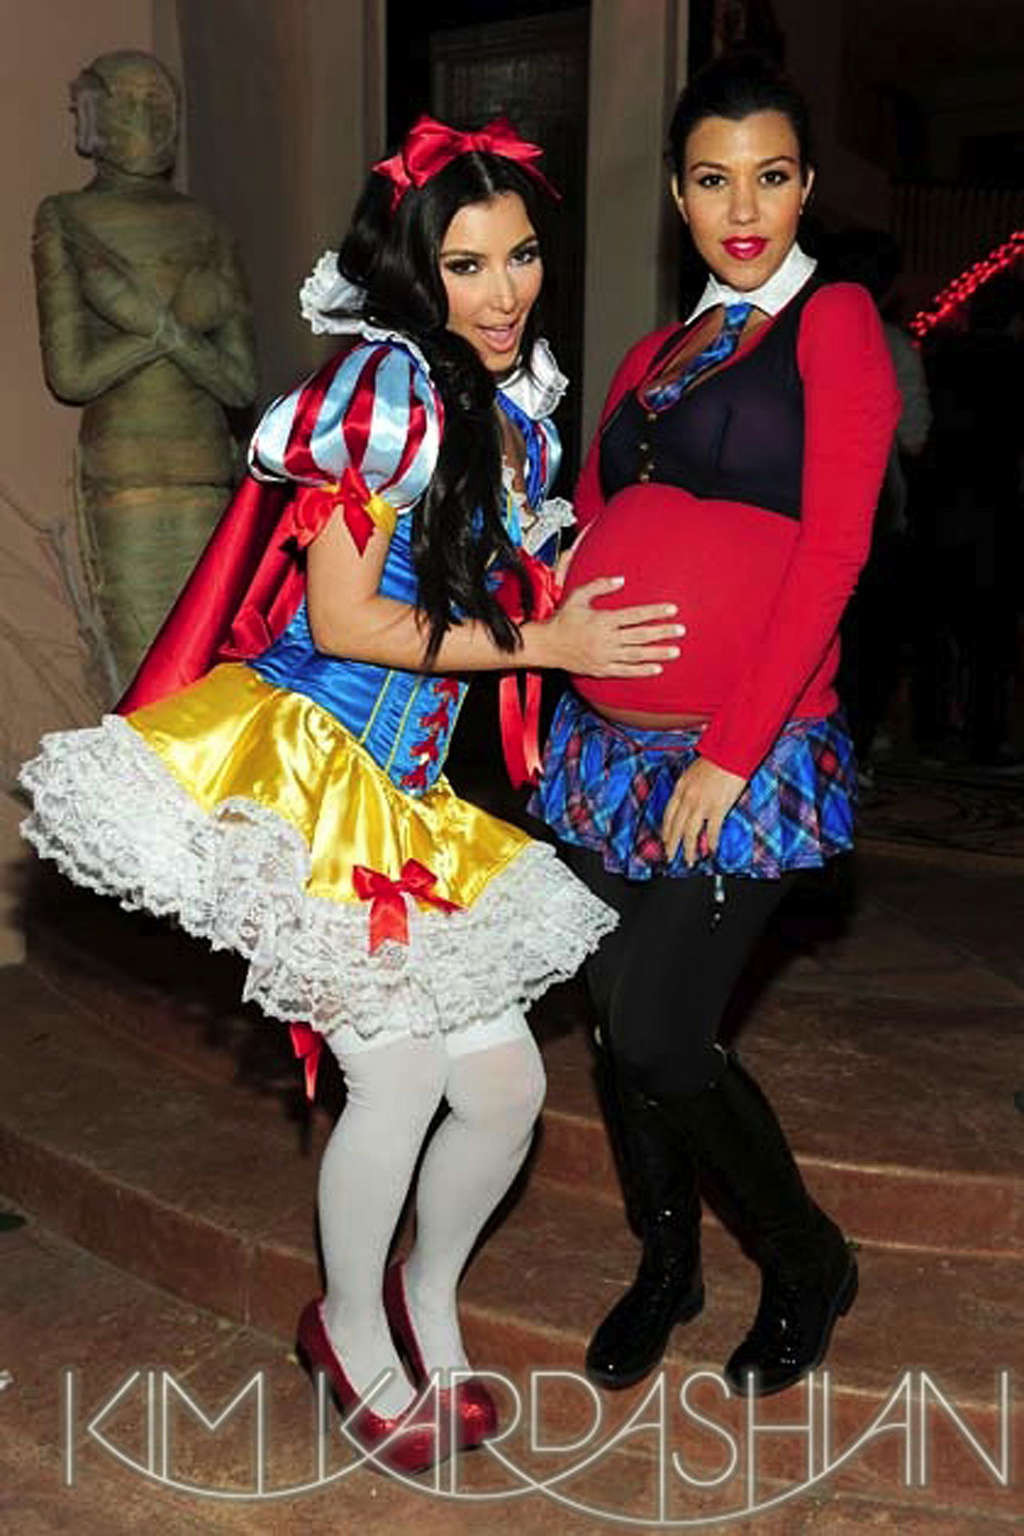 Kim Kardashian looking sexy in helloween costume and showing her tits #75375631